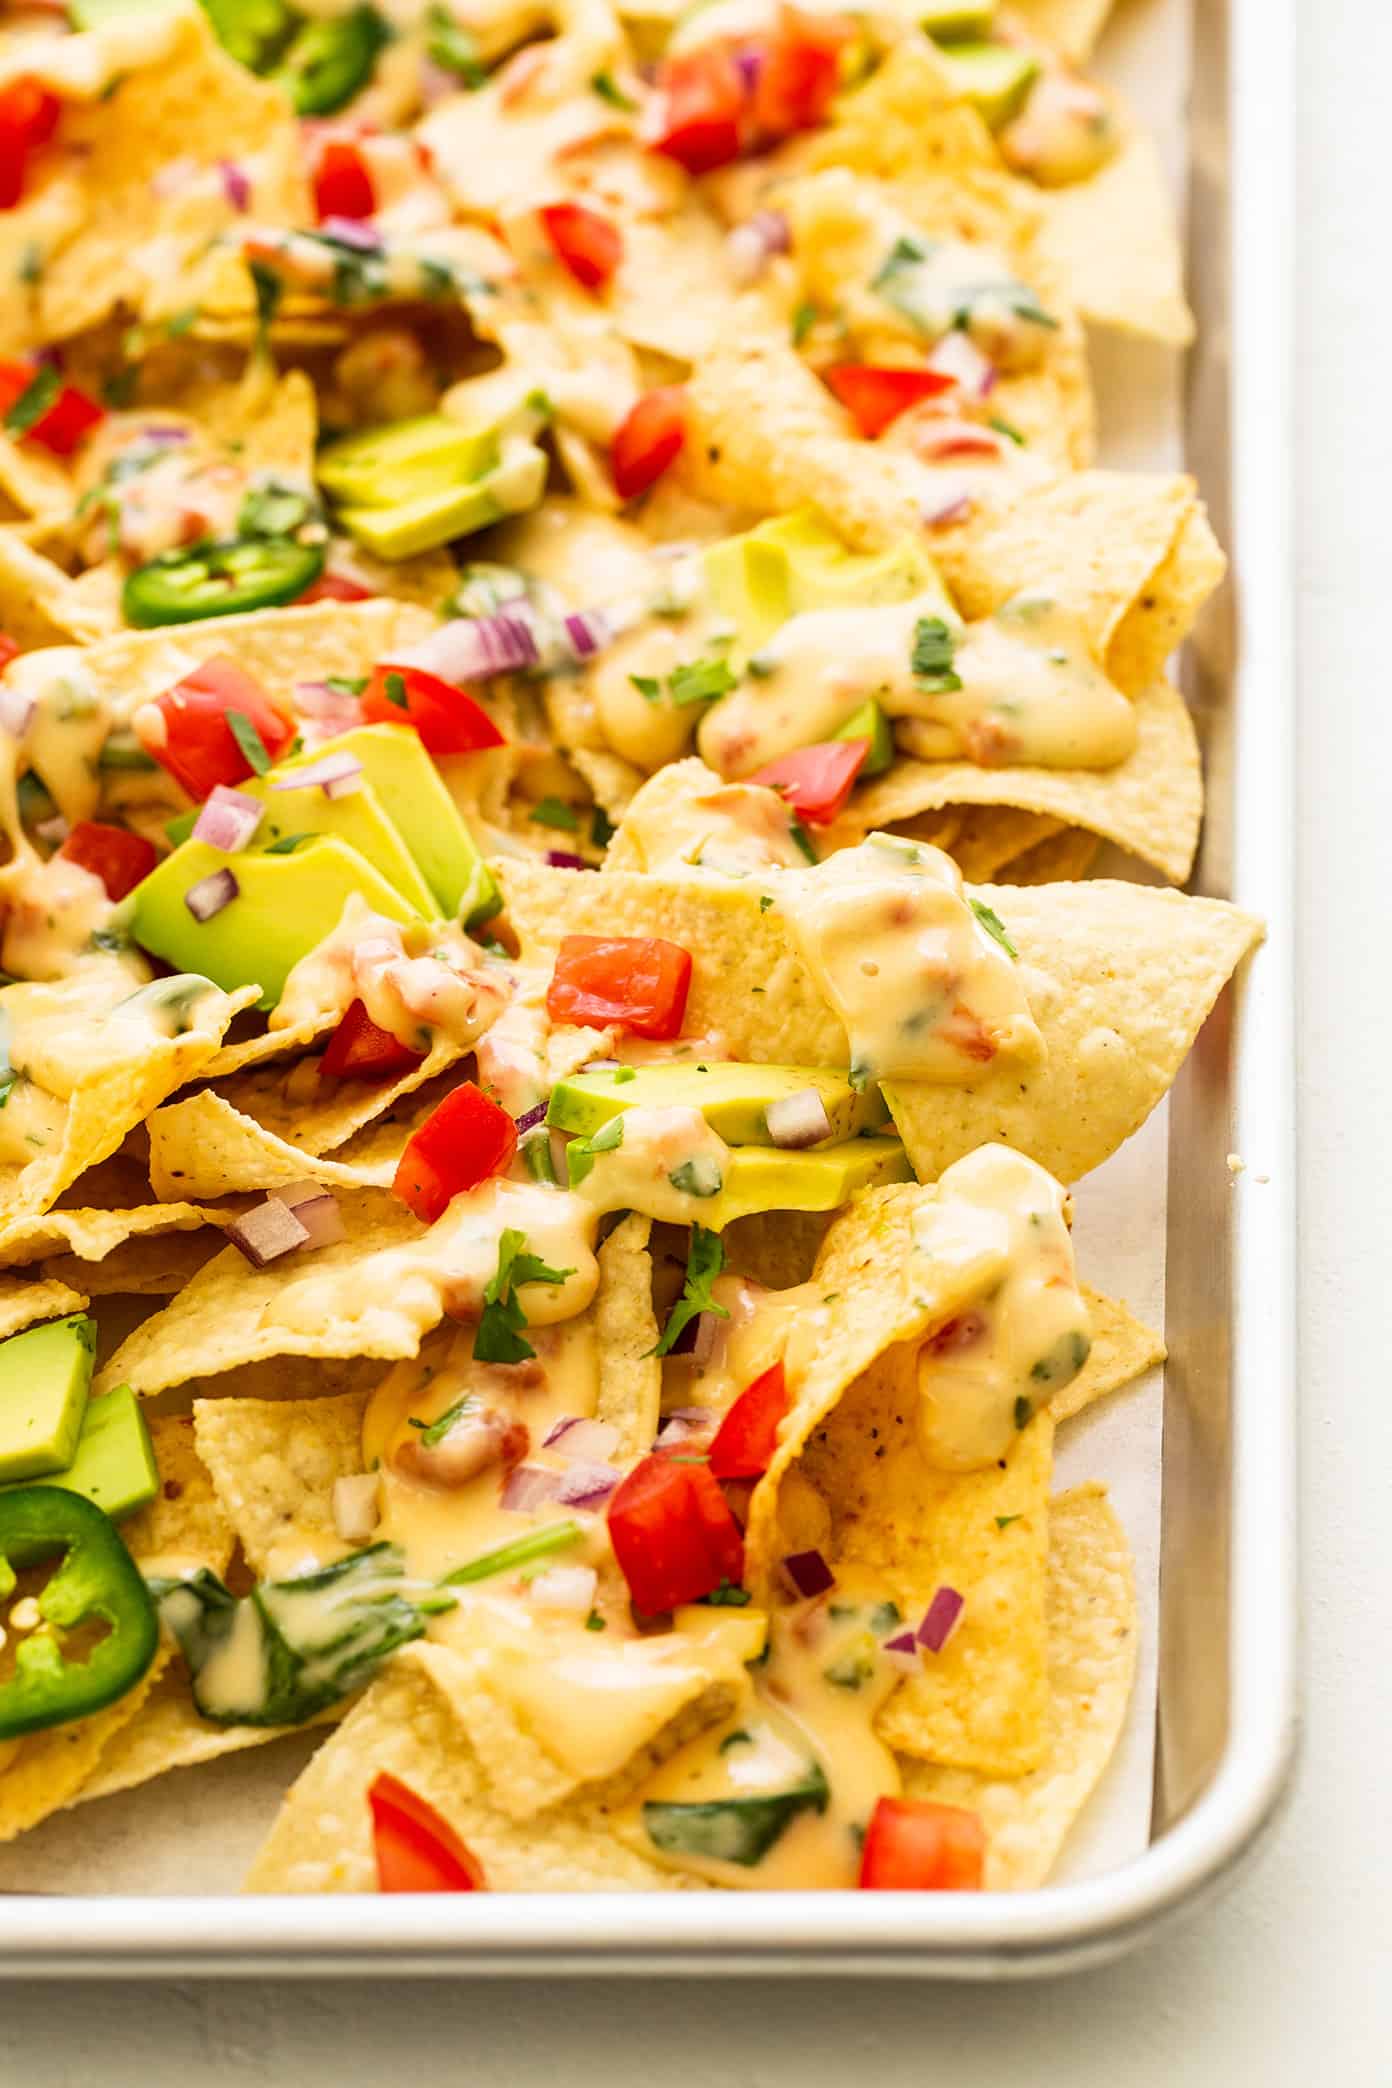 Easy Nachos in a Baking Sheet with Avocado and Queso Blanco